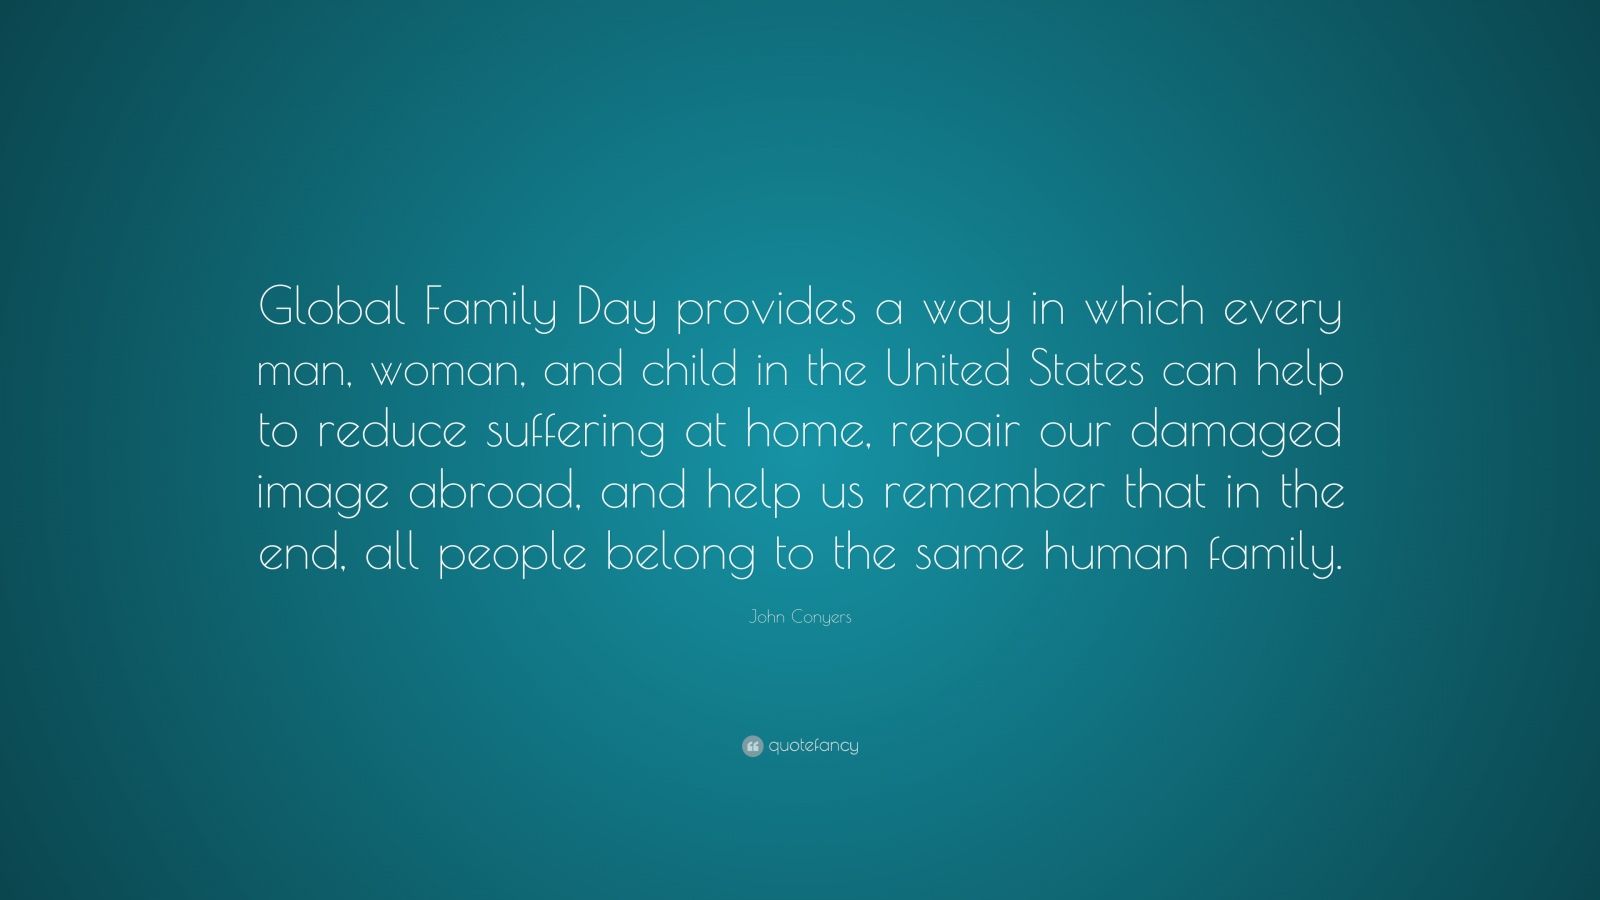 global family day provides a way in which every man, woman and child in the united statescan help to reduce suffering at home